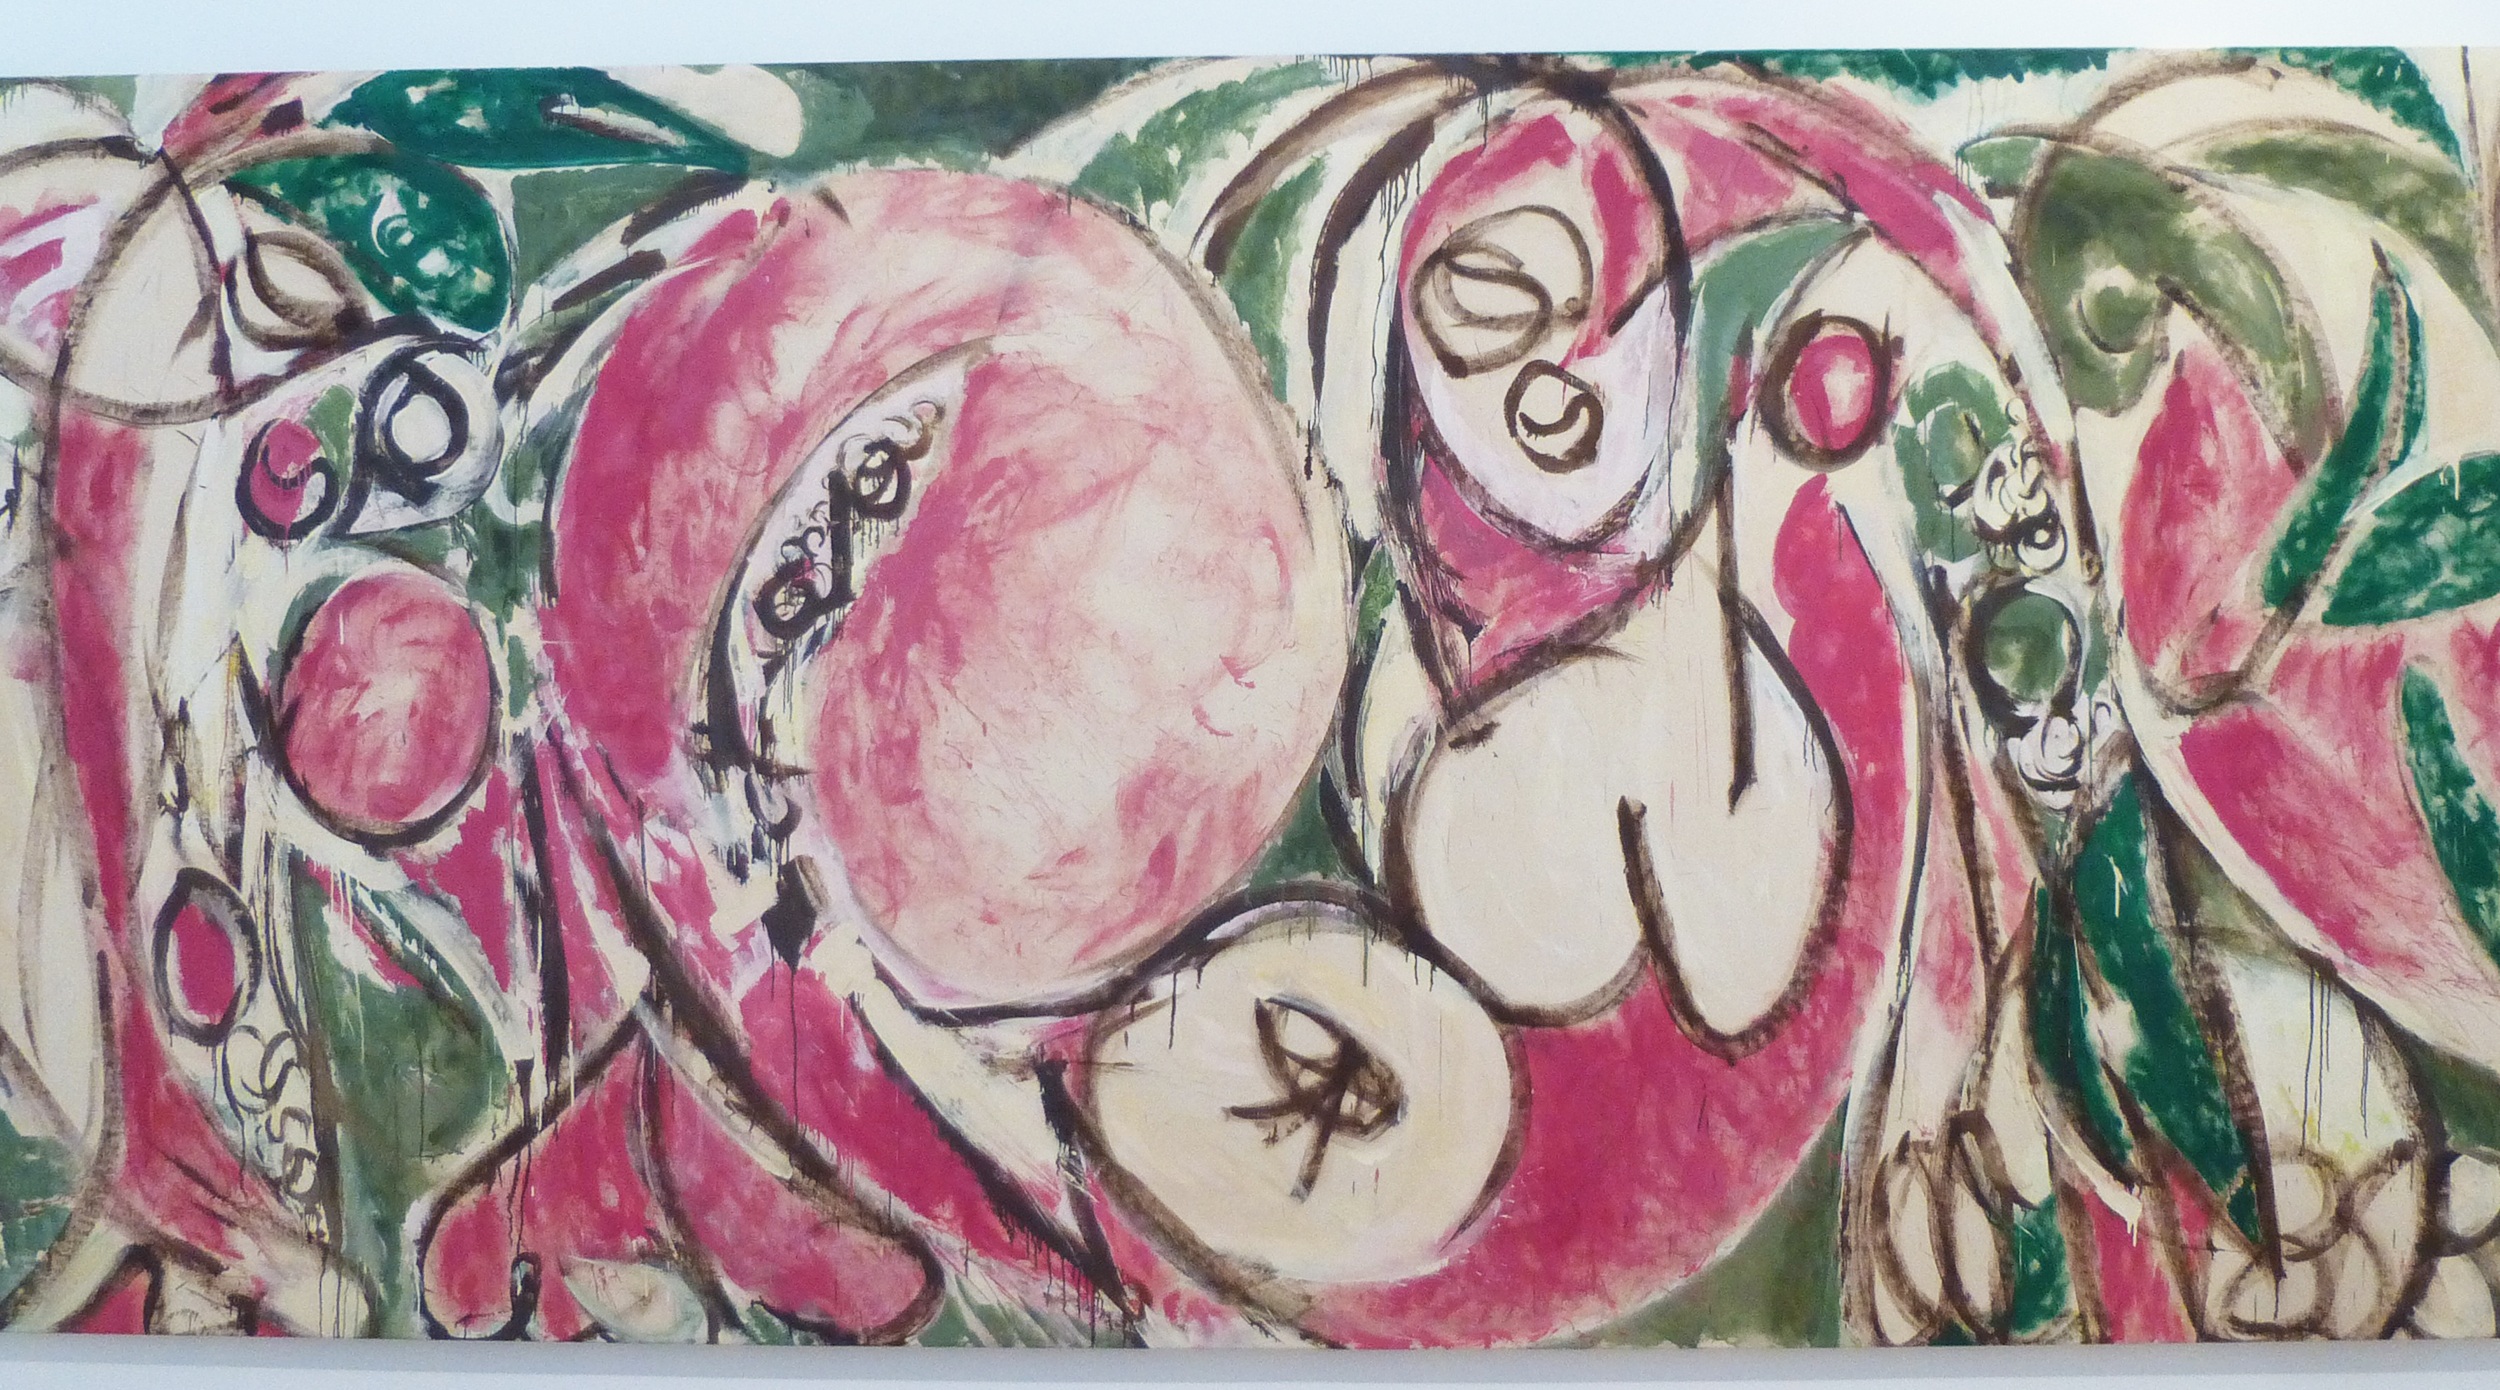 Out & About: Lee Krasner - Living Colour at The Barbican Gallery - Kit Kemp